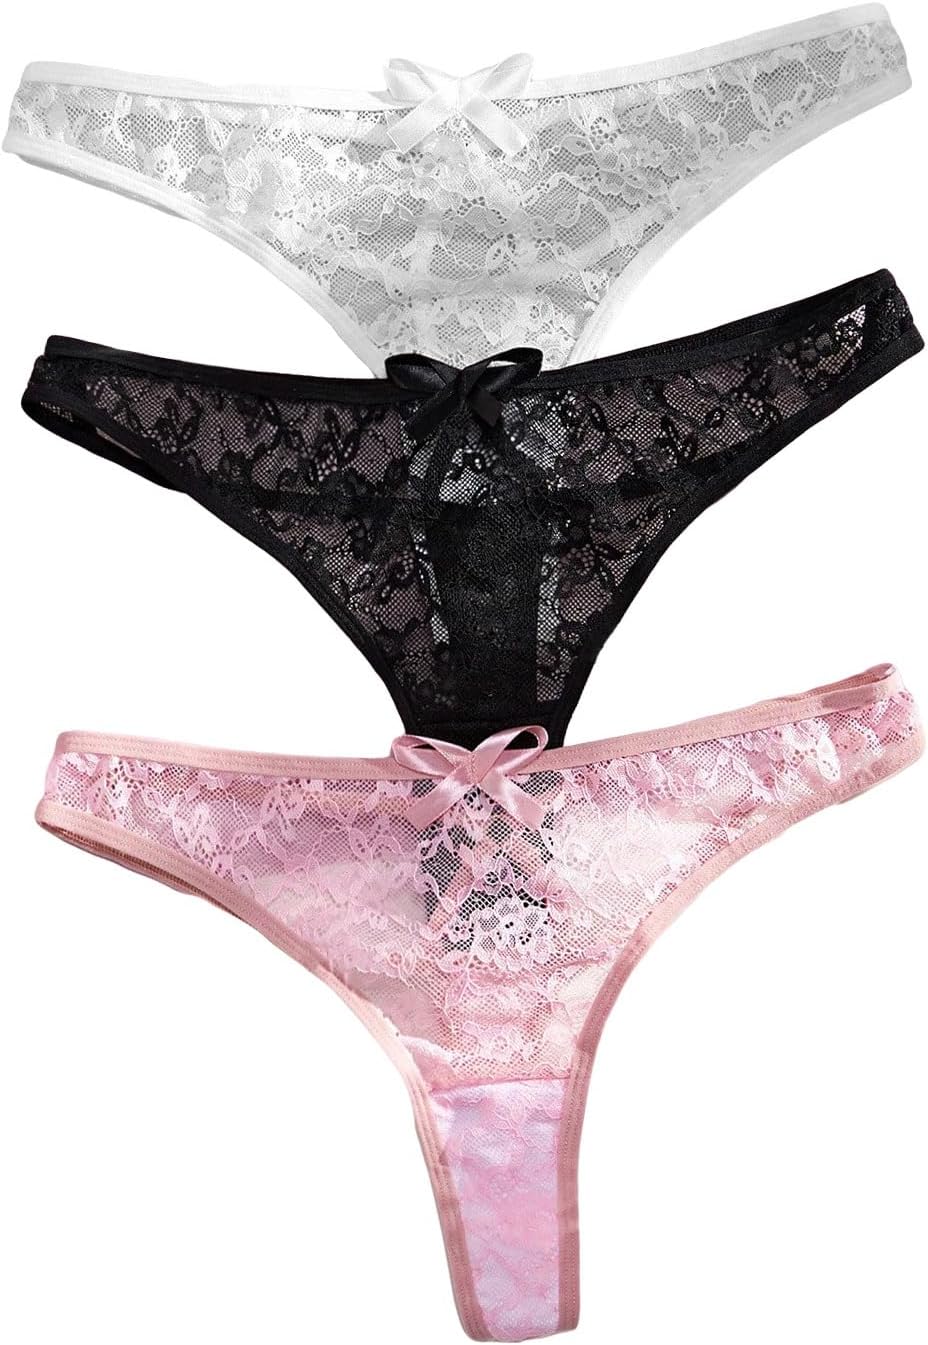 Milumia Women 3 Pack Sexy Lace Thongs Panties Low Rise G String Soft Cheeky Underwear Set